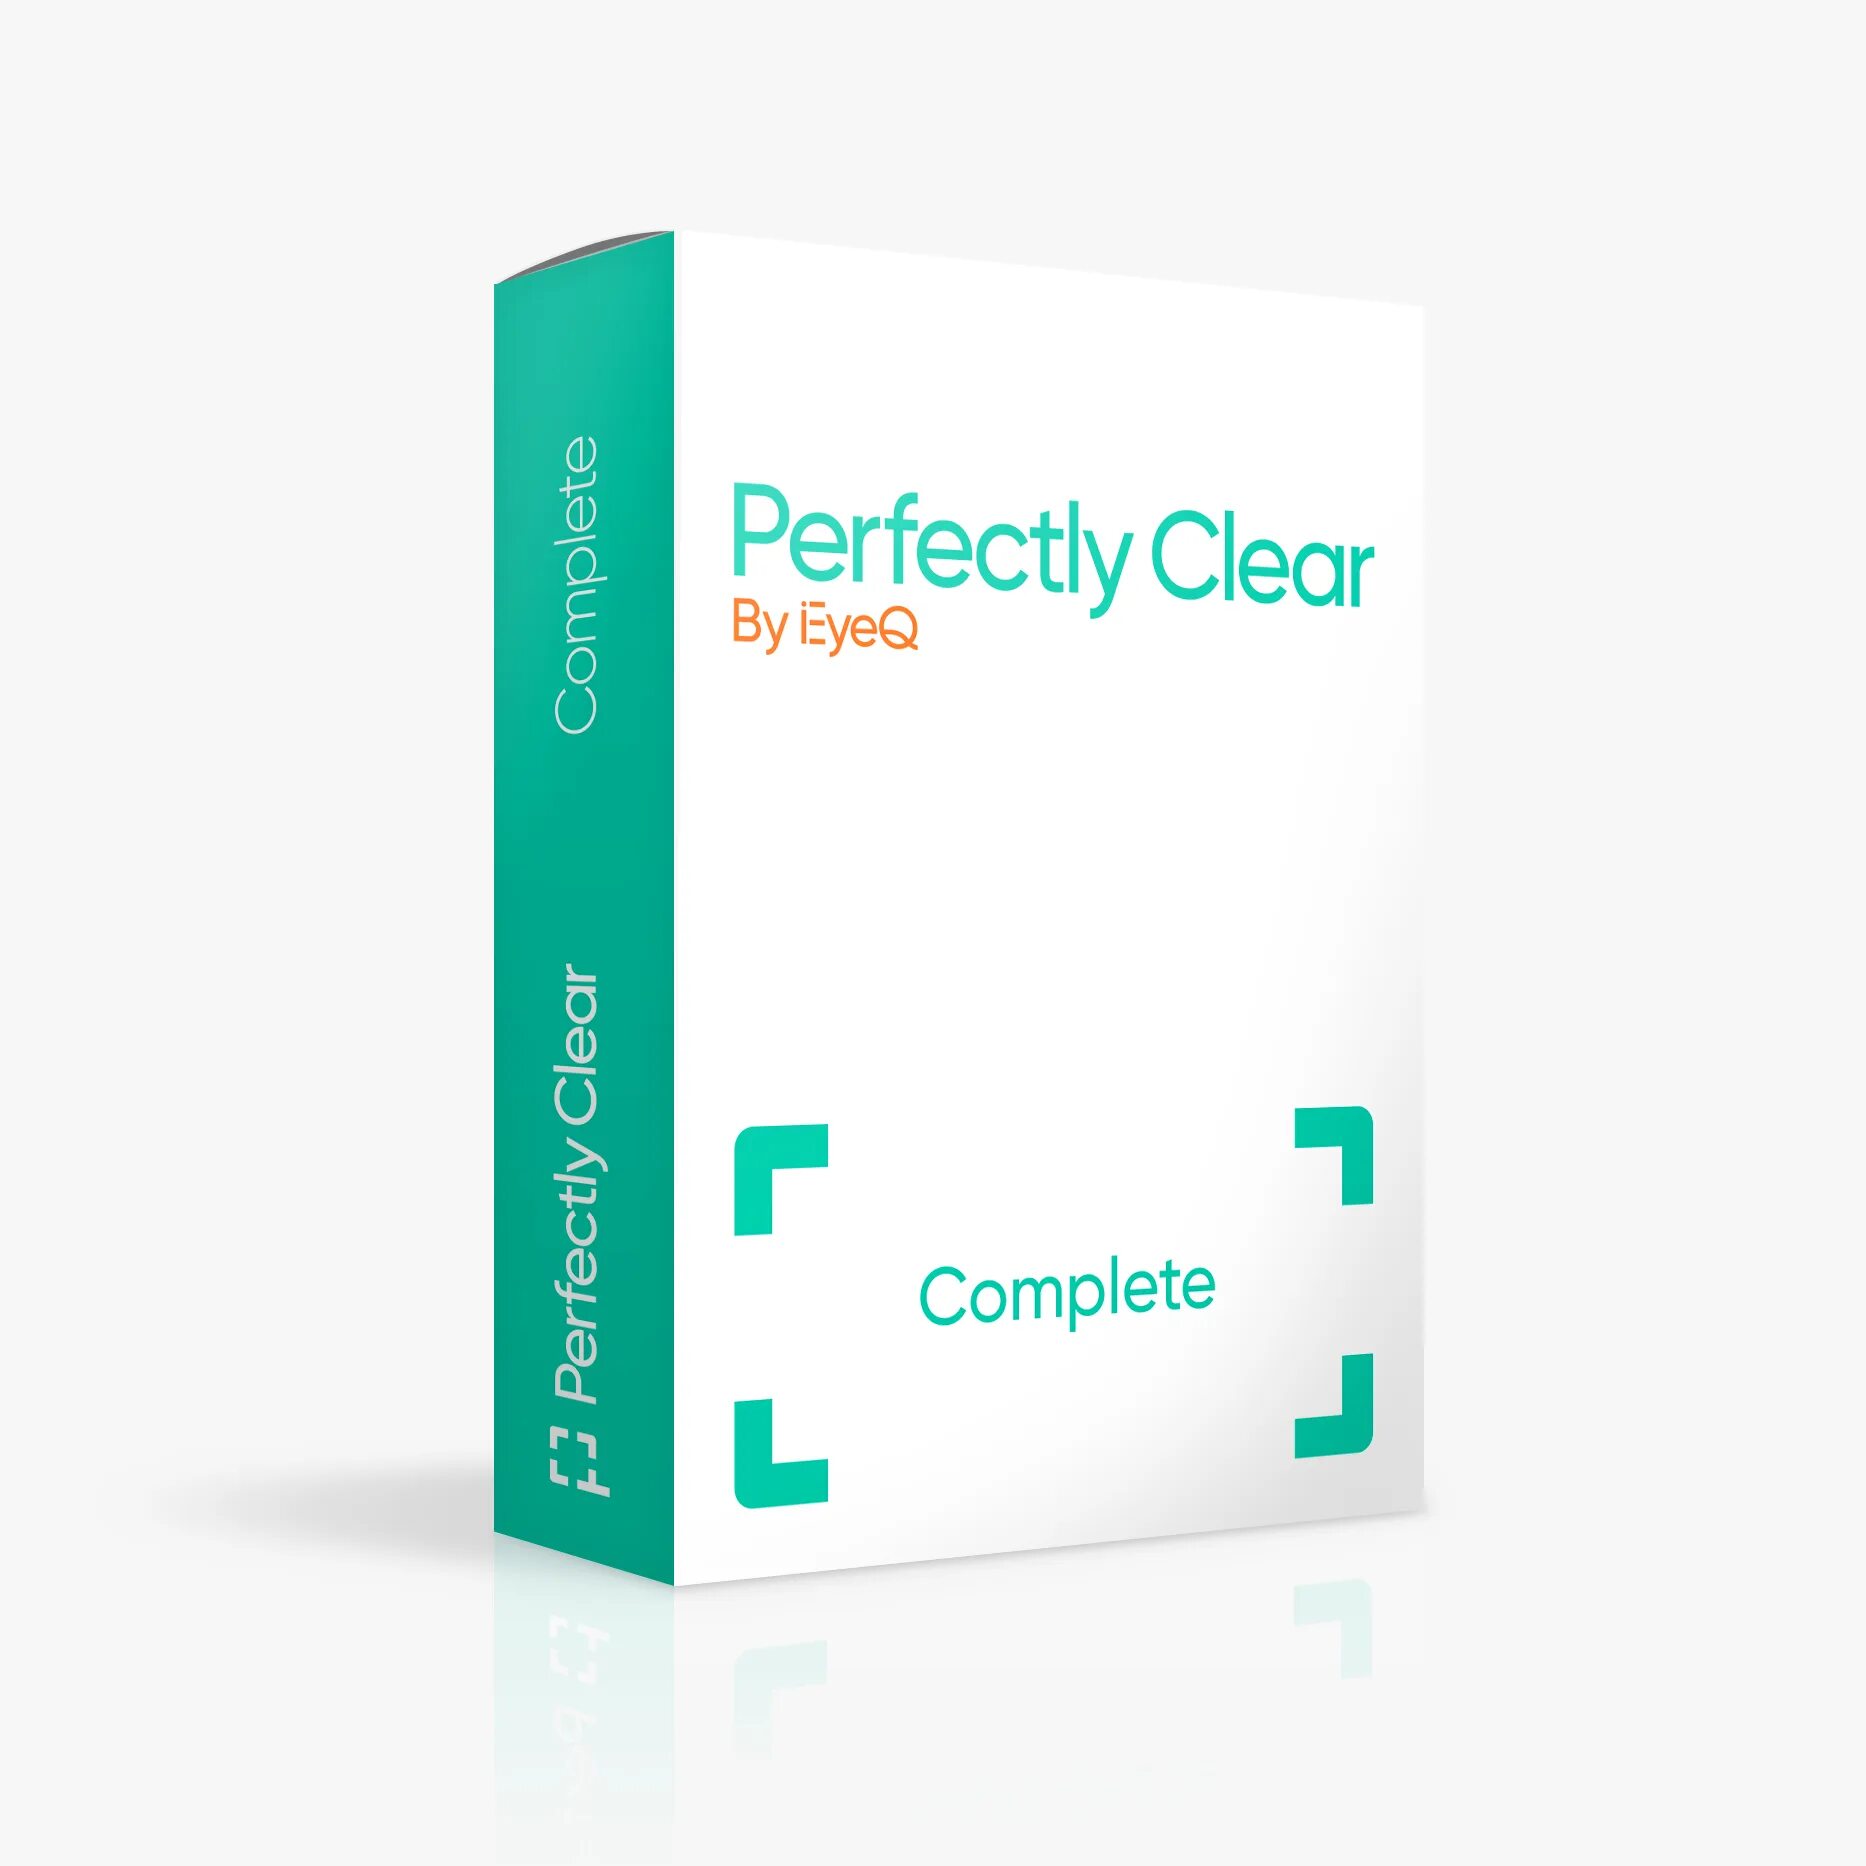 Perfectly clear. Perfectly Clear complete. Athentech perfectly Clear. Perfectly Clear v3 это. Perfectly.